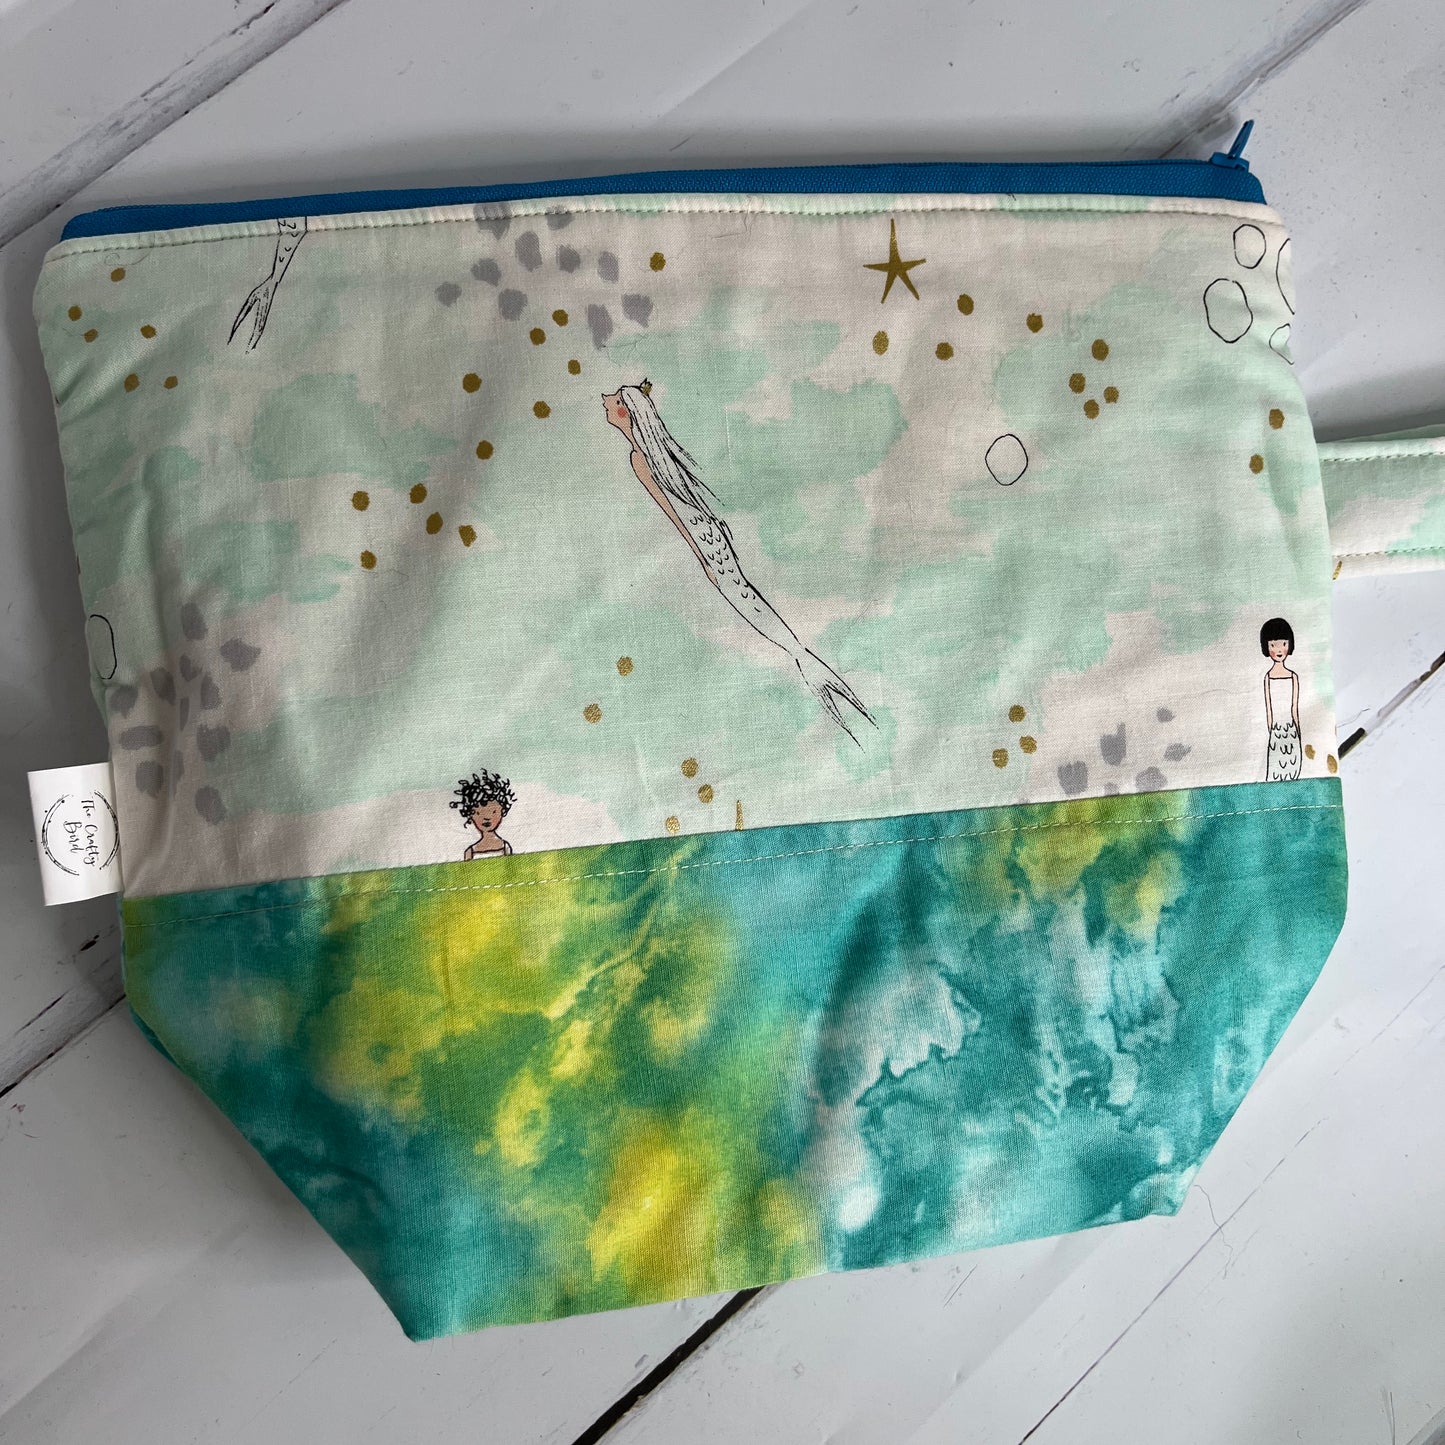 Mermaids hand made cotton Project Bag with magnetic accessories case